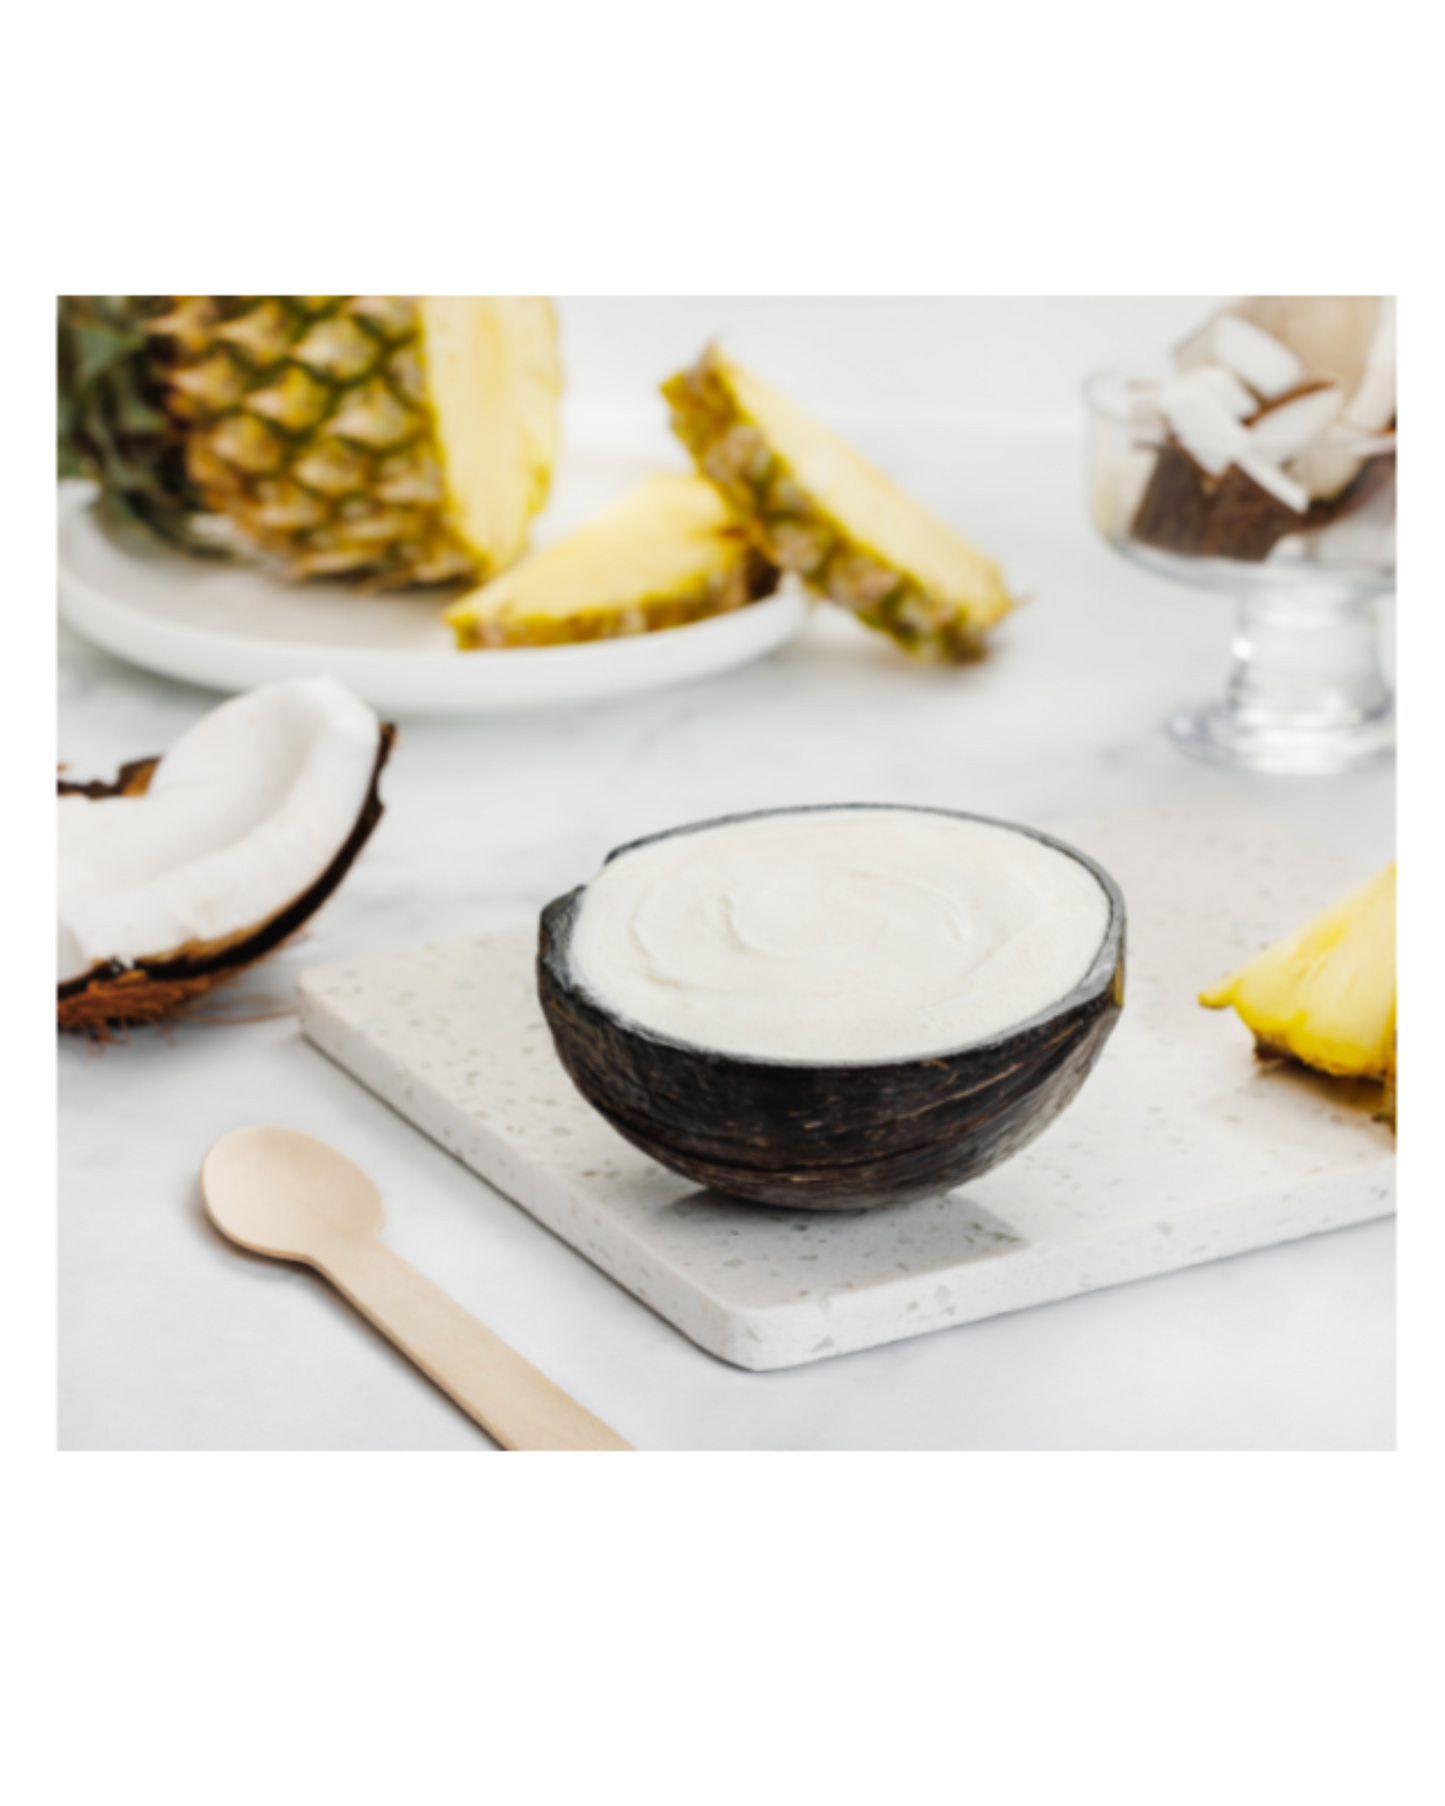 Pineapple + Coconut Hand-Made Sorbet in Natural Fruit Shell